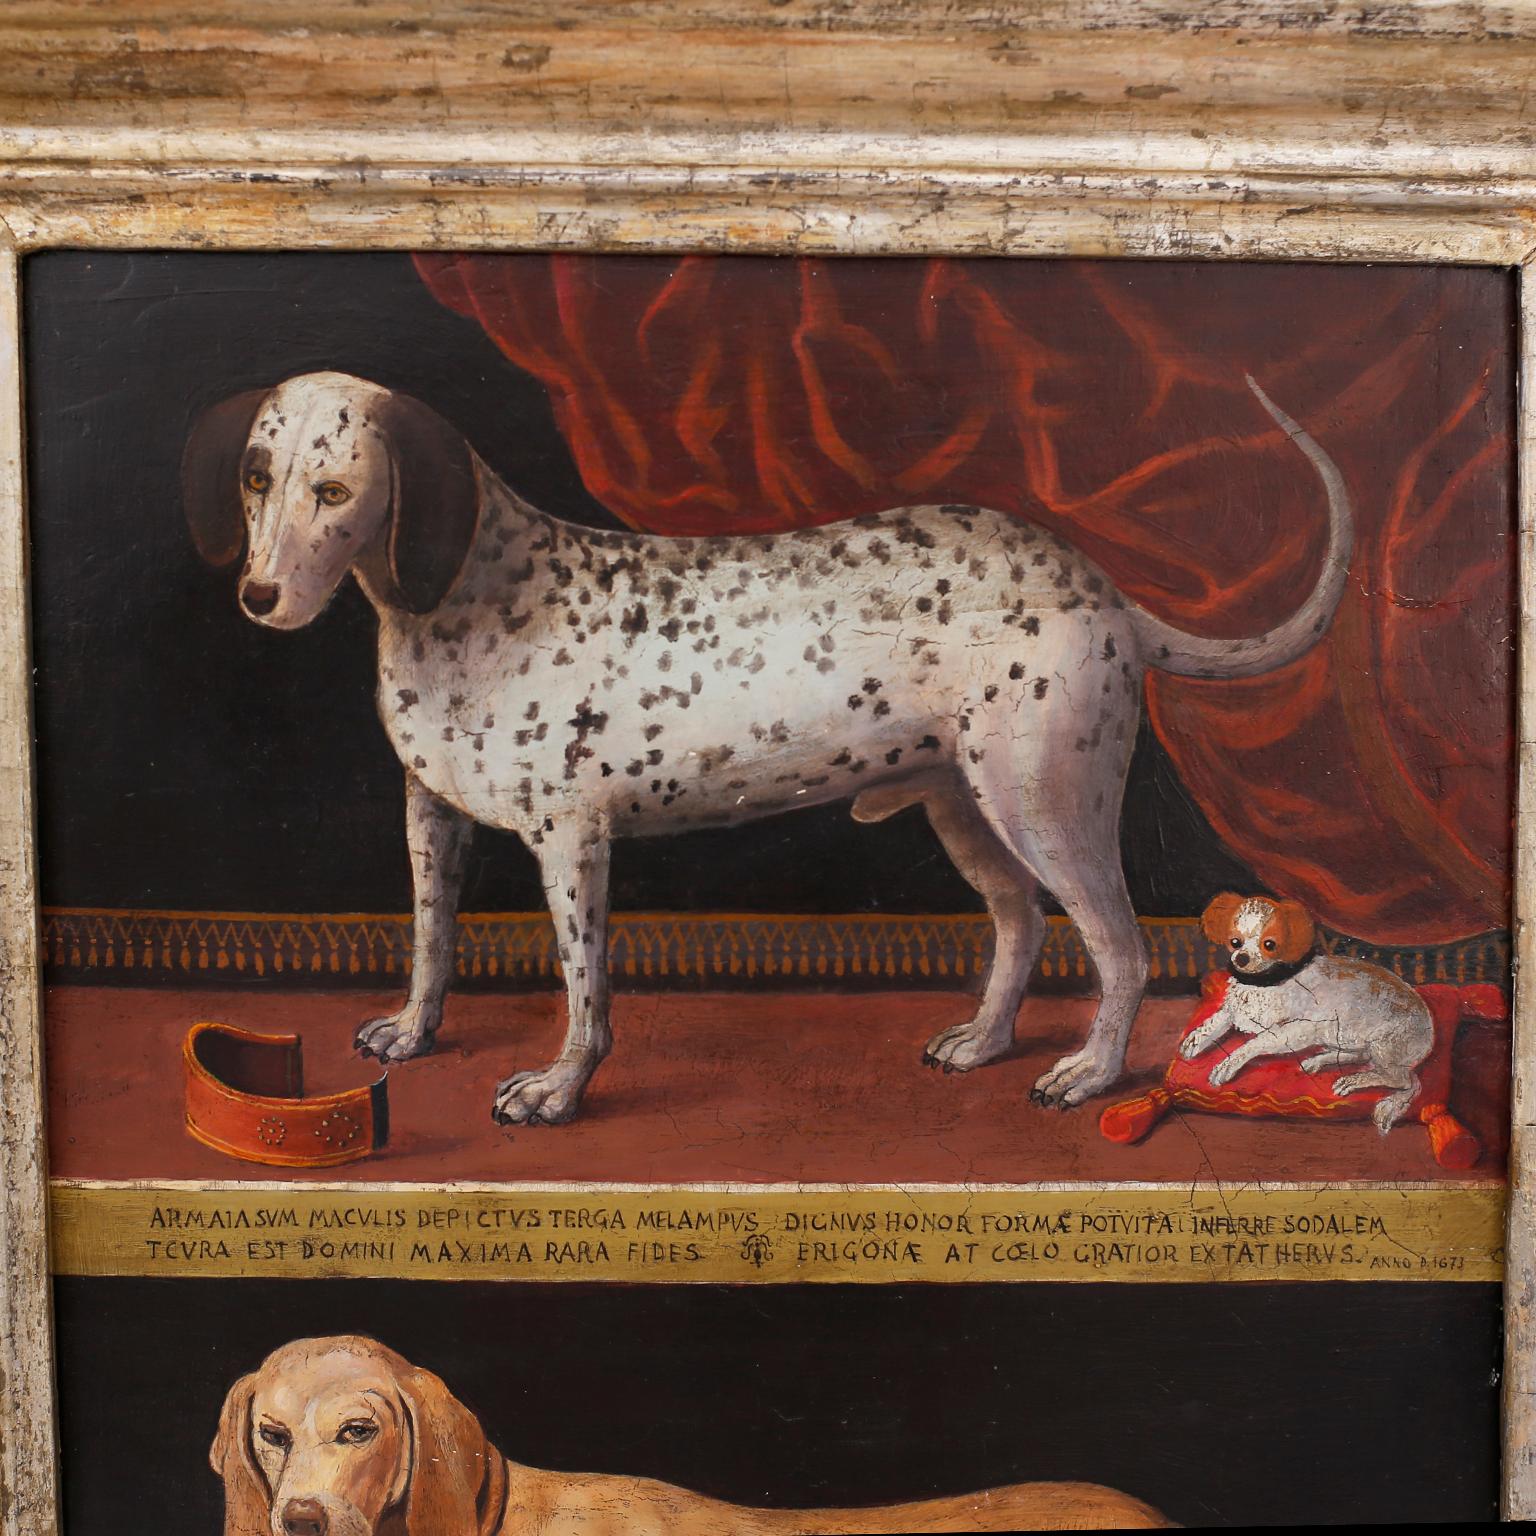 Delightful Italian oil painting on board depicting two separate images of dogs, painted over gesso in the early 20th century. Executed in a Renaissance style complete with Latin descriptions. Presented in an 18th century gesso and silver leaf frame.